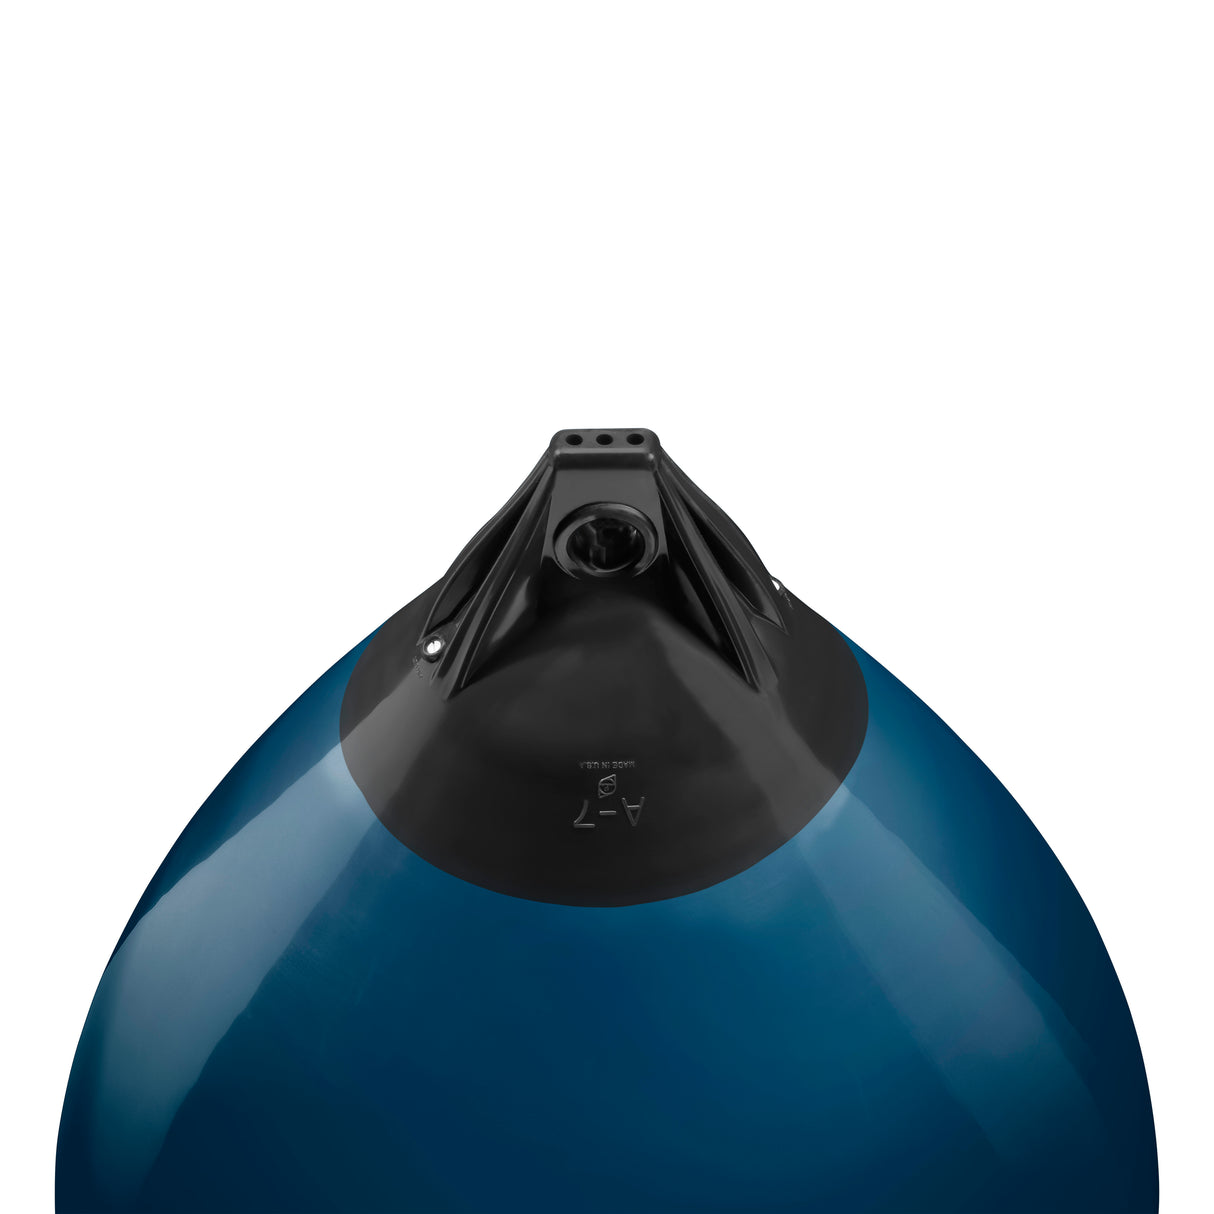 Catalina Blue buoy with Black-Top, Polyform A-7 angled shot